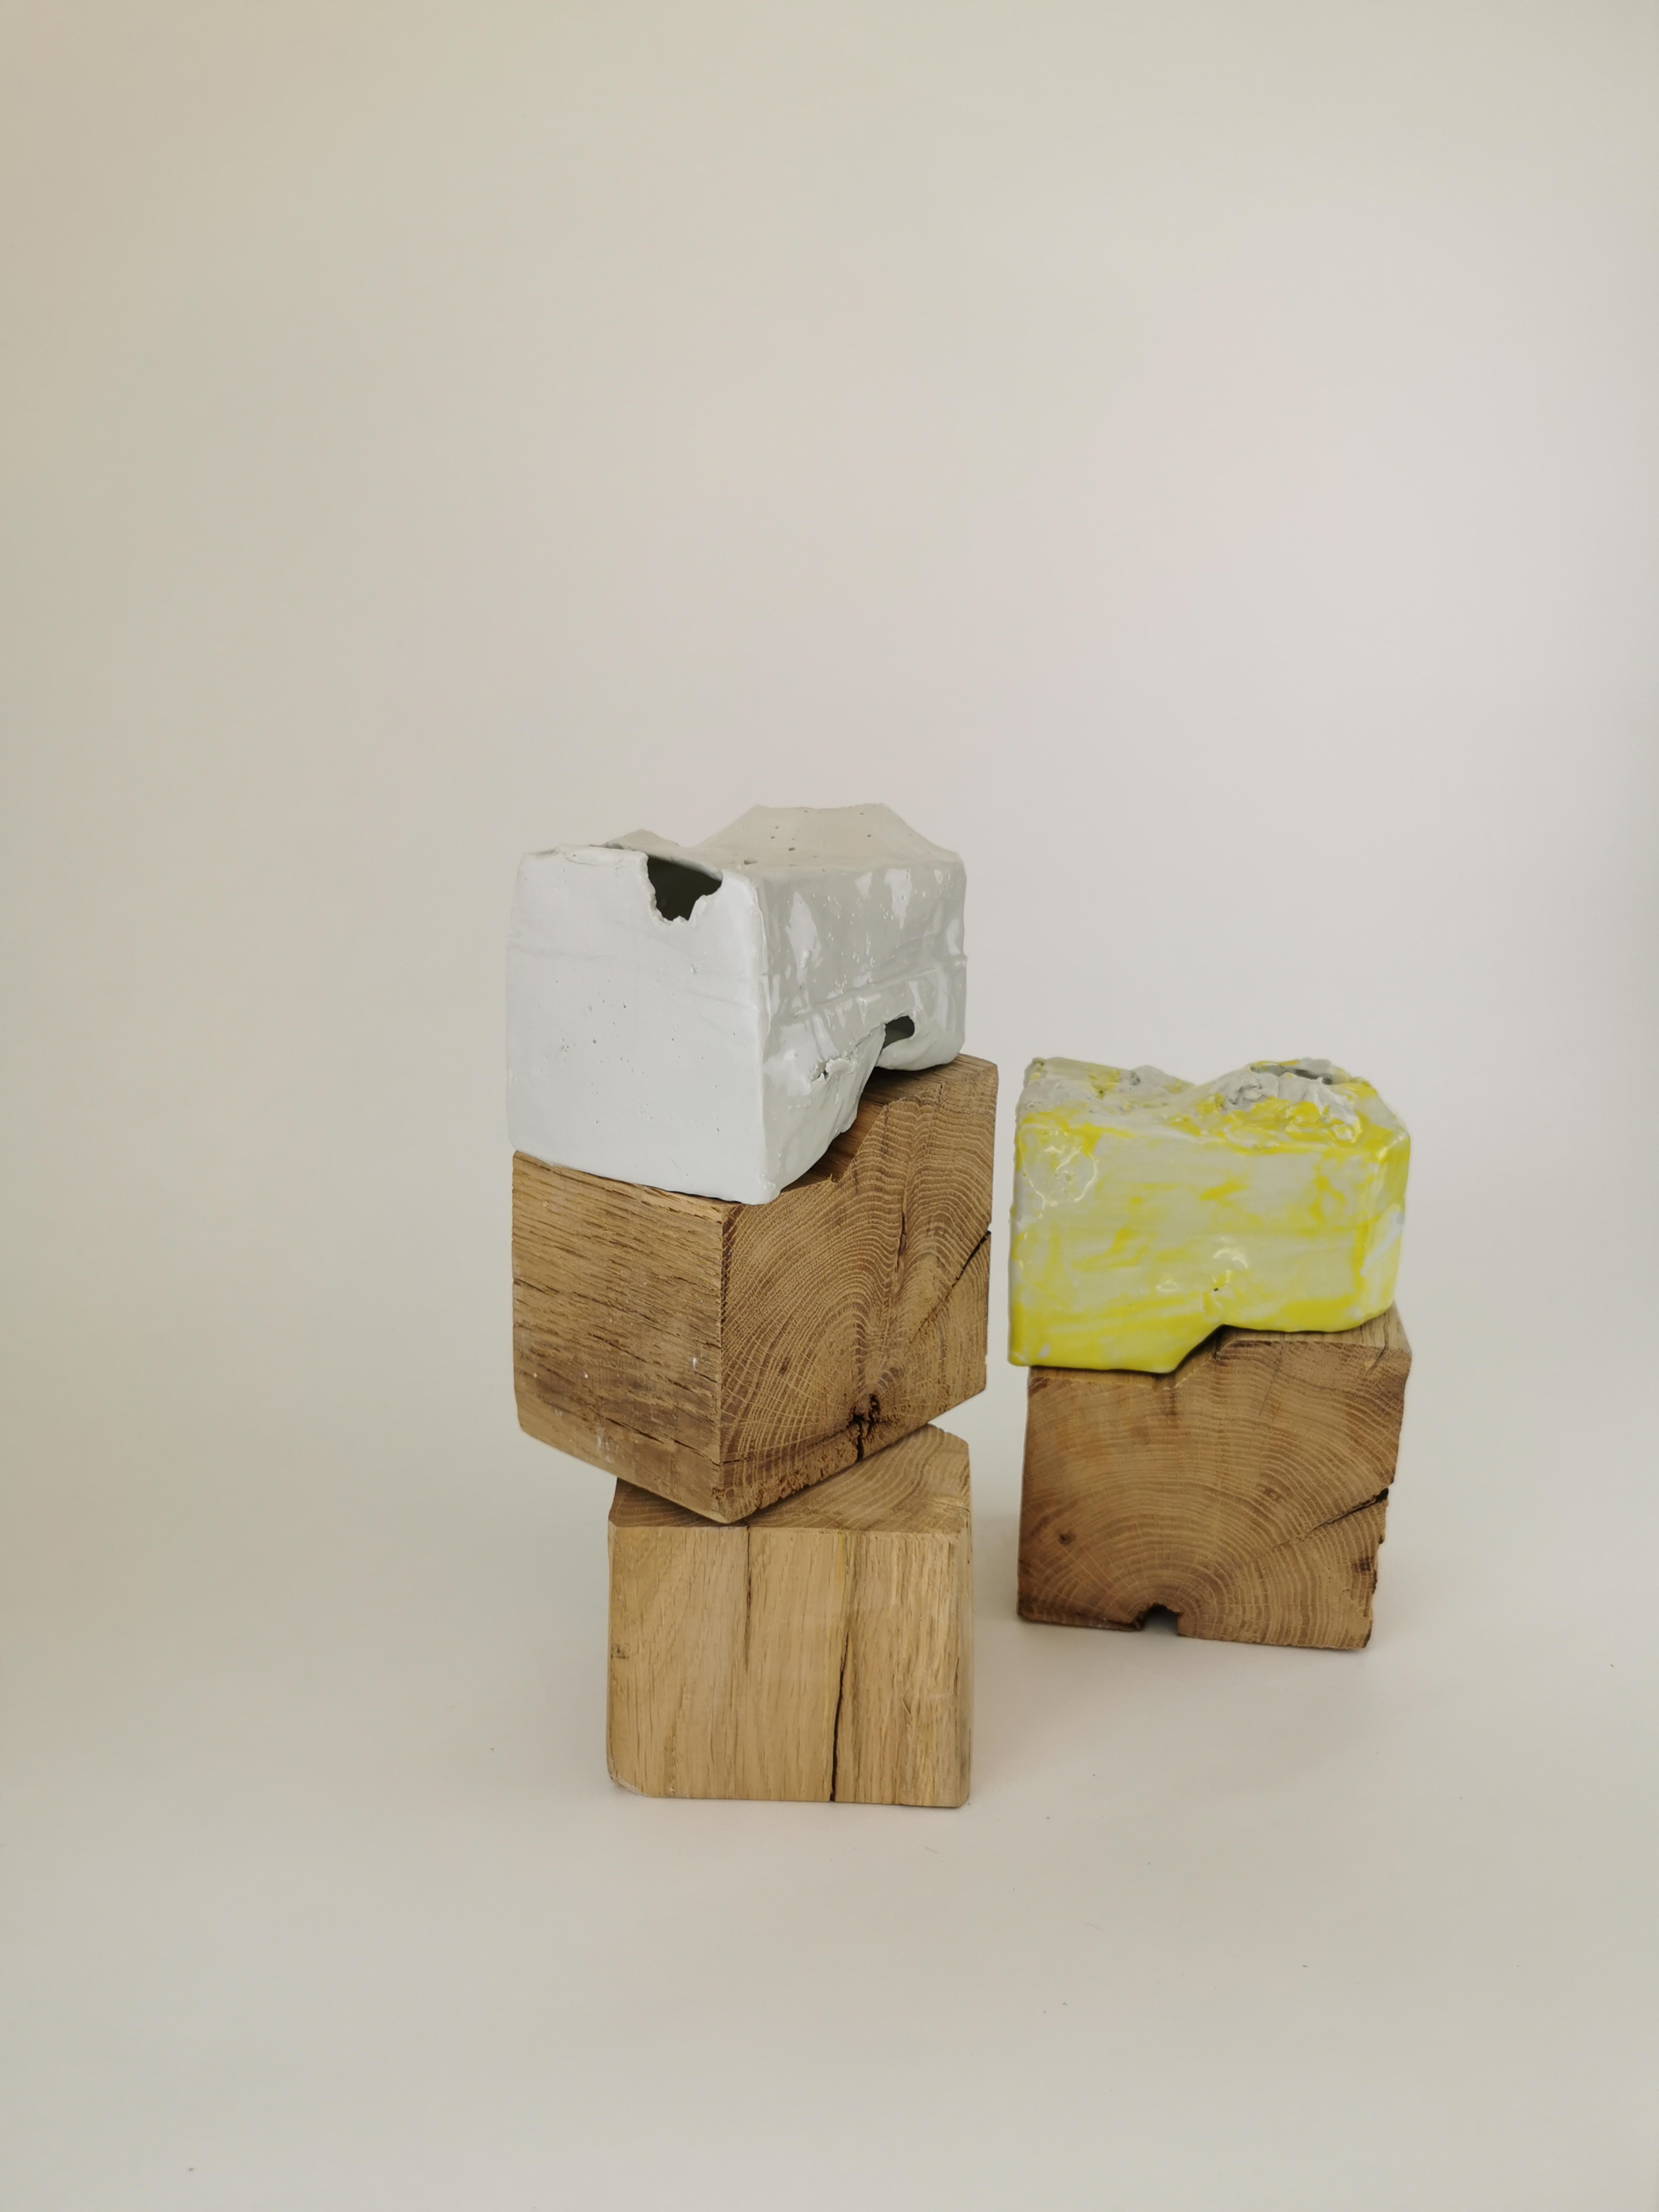 Set of 2 Shelter IV Decorative Objects by Dora Stanczel
One of a Kind.
Dimensions: D 9 x W 14 x H 11 cm (each).
Materials: Porcelain, colored glaze and gold.

Dimensions are variable. A wooden stand can be included. Please contact us.

I create